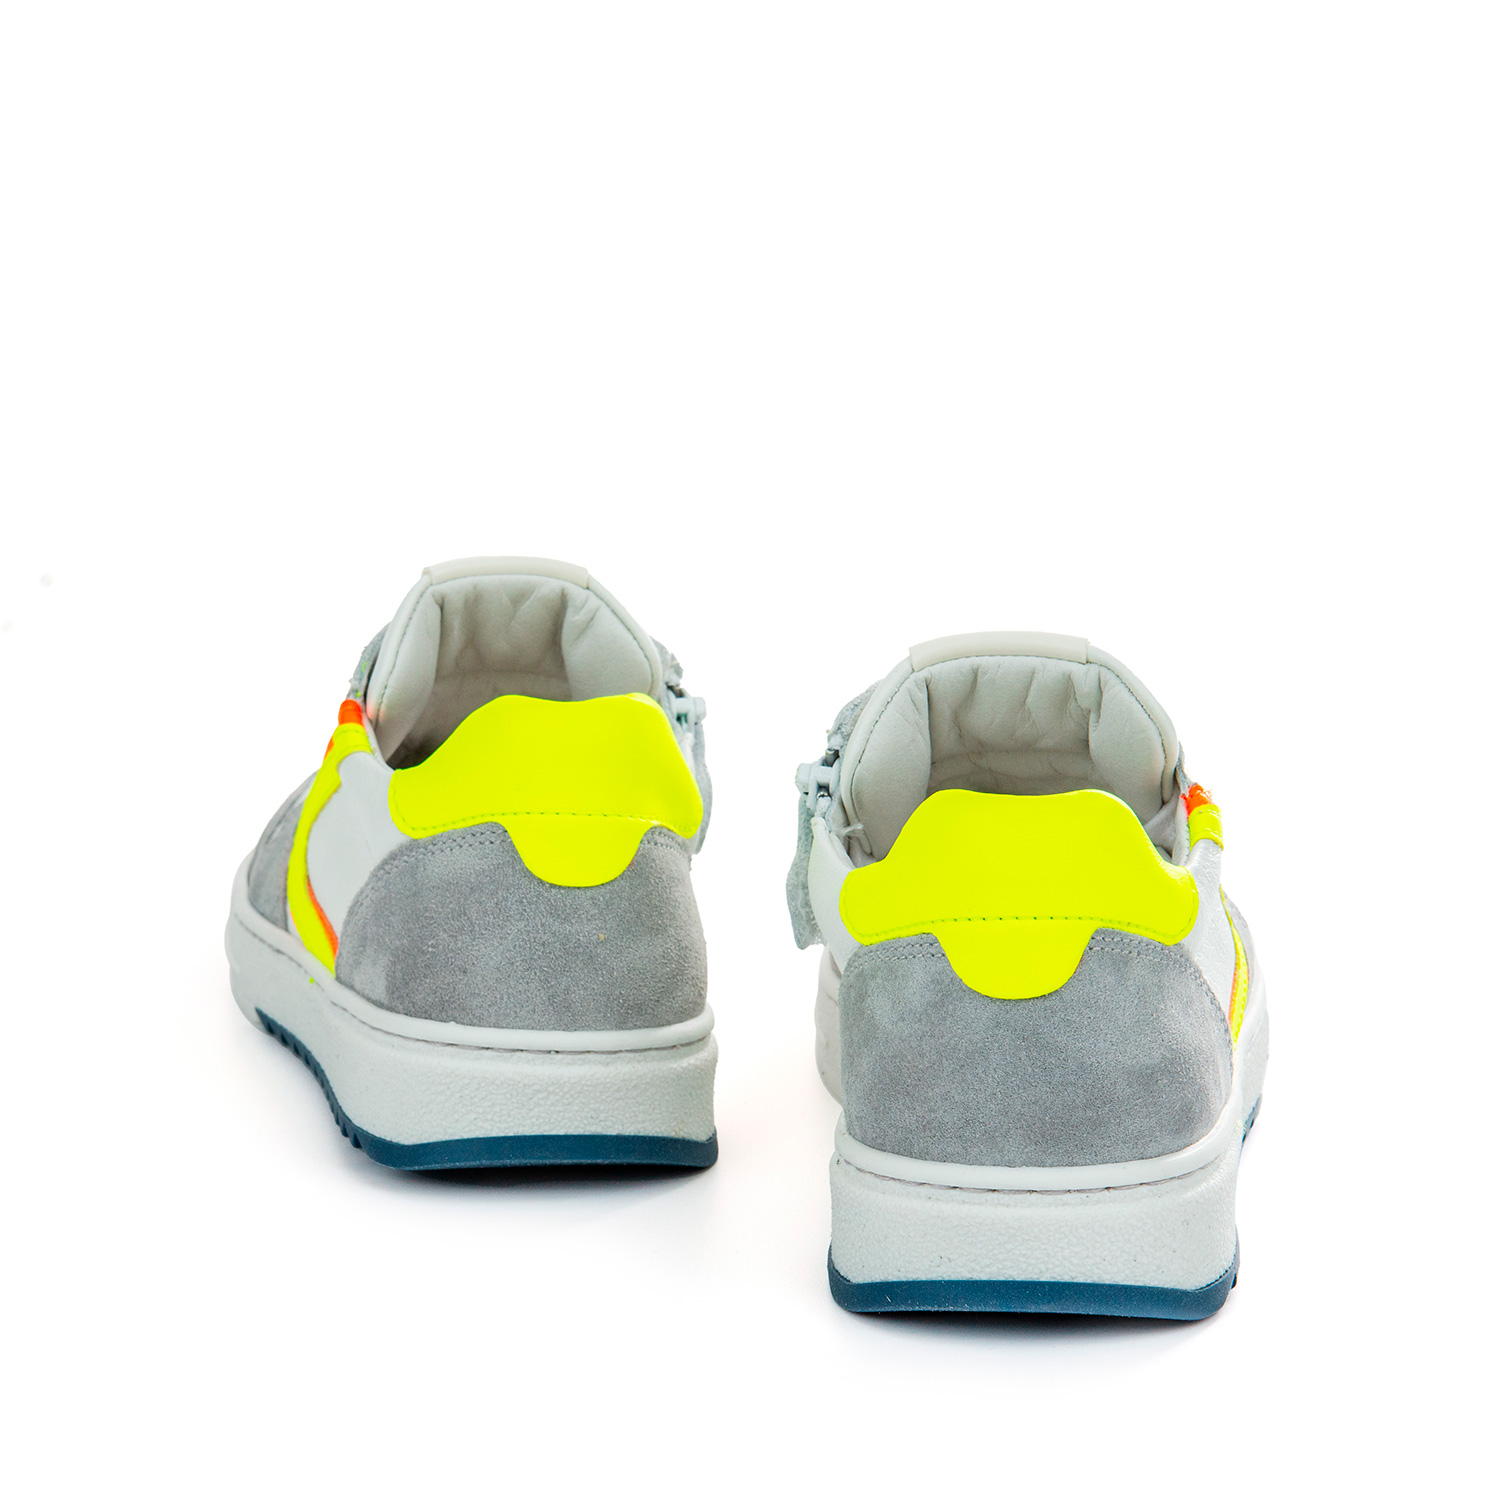 PARRY crs - calf white + yellow fluo